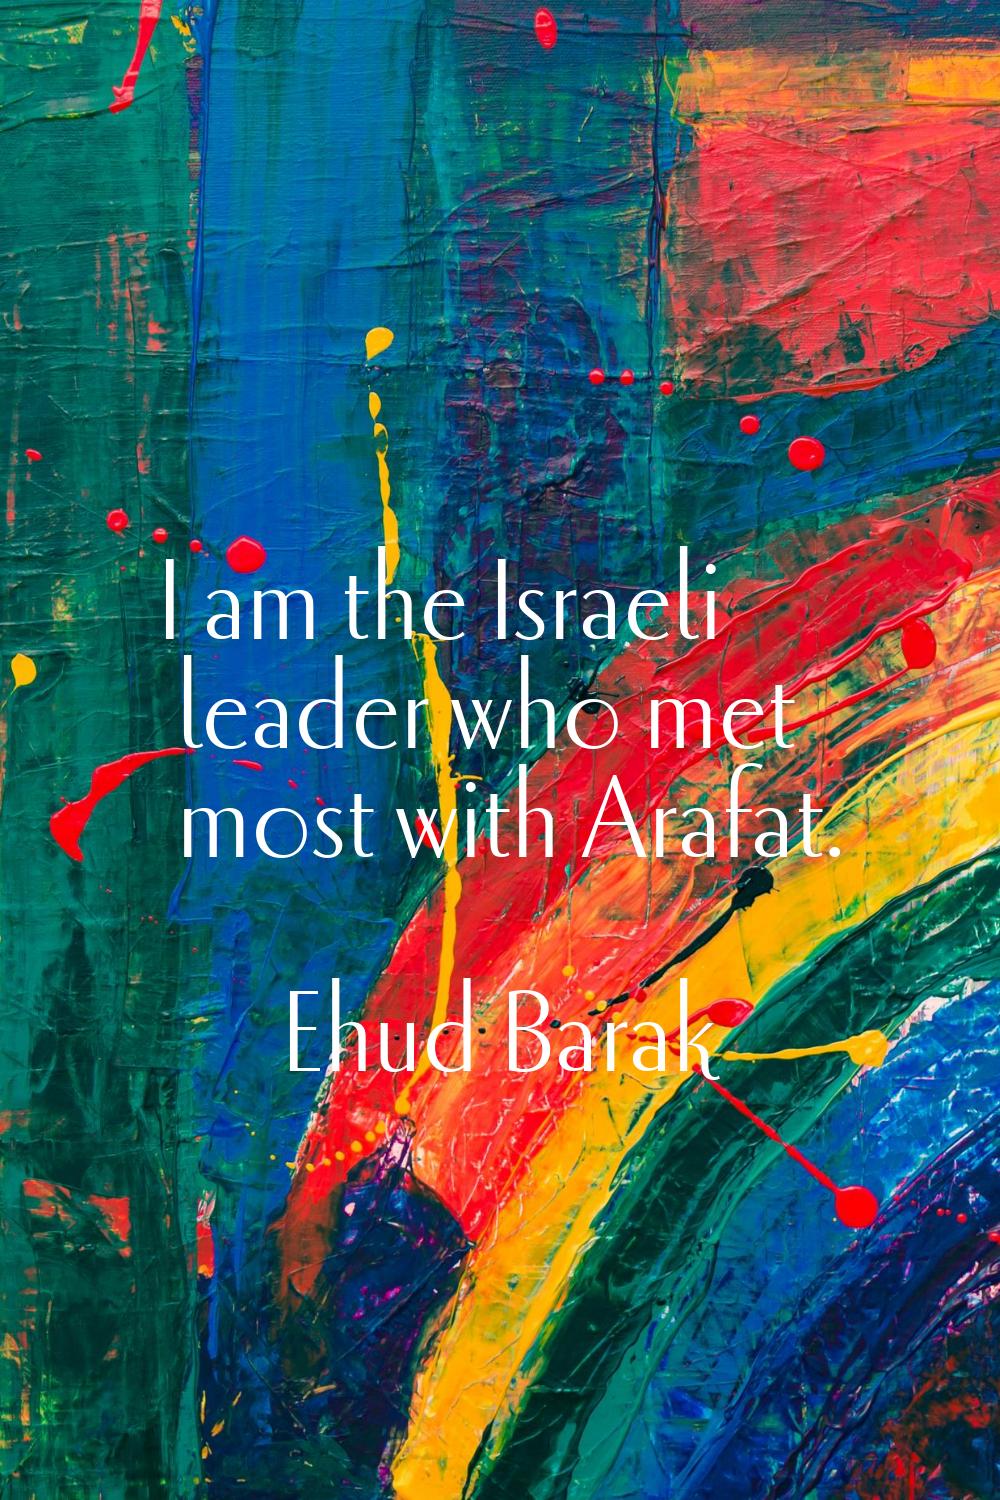 I am the Israeli leader who met most with Arafat.